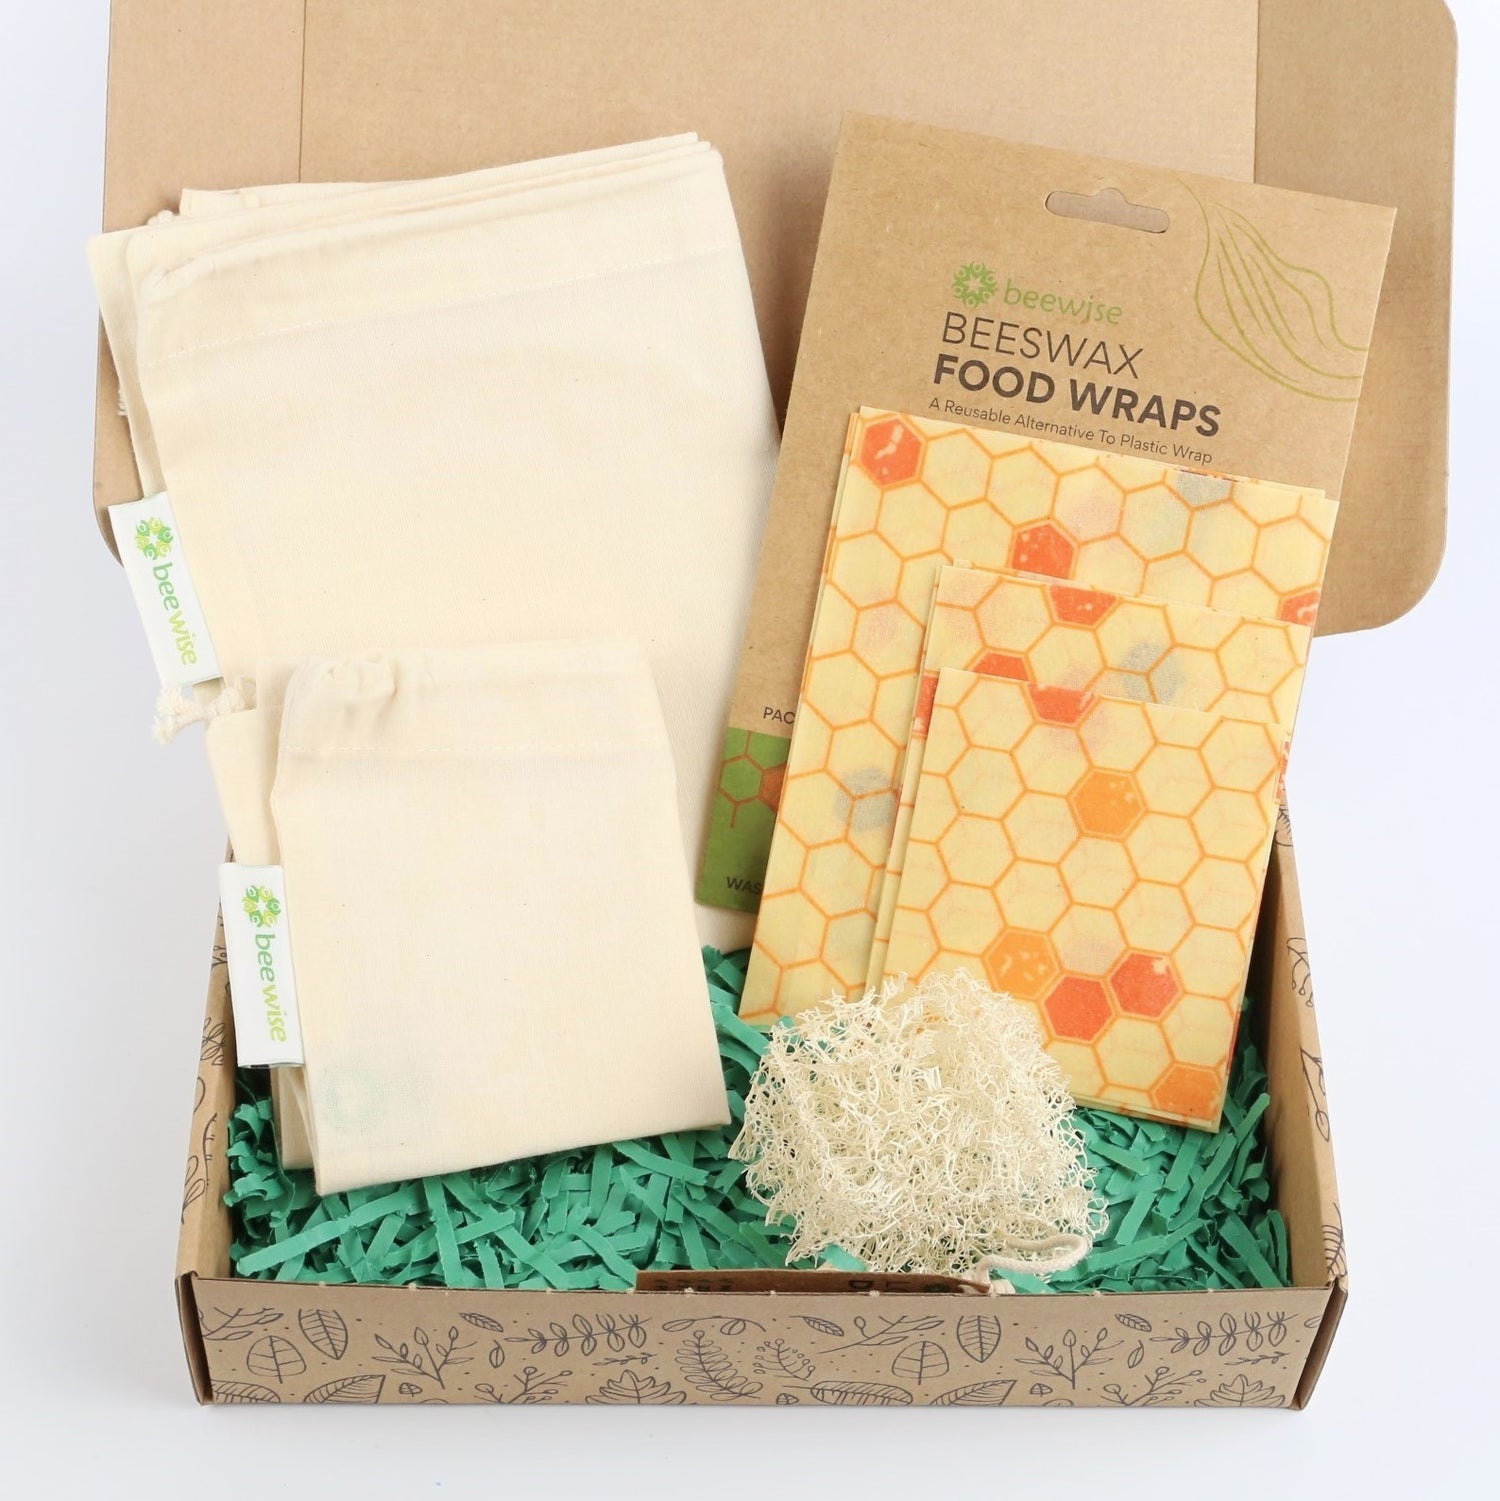 eco gift box with sustainable products with produce cotton bags, beeswax wraps and loofah dish sponge